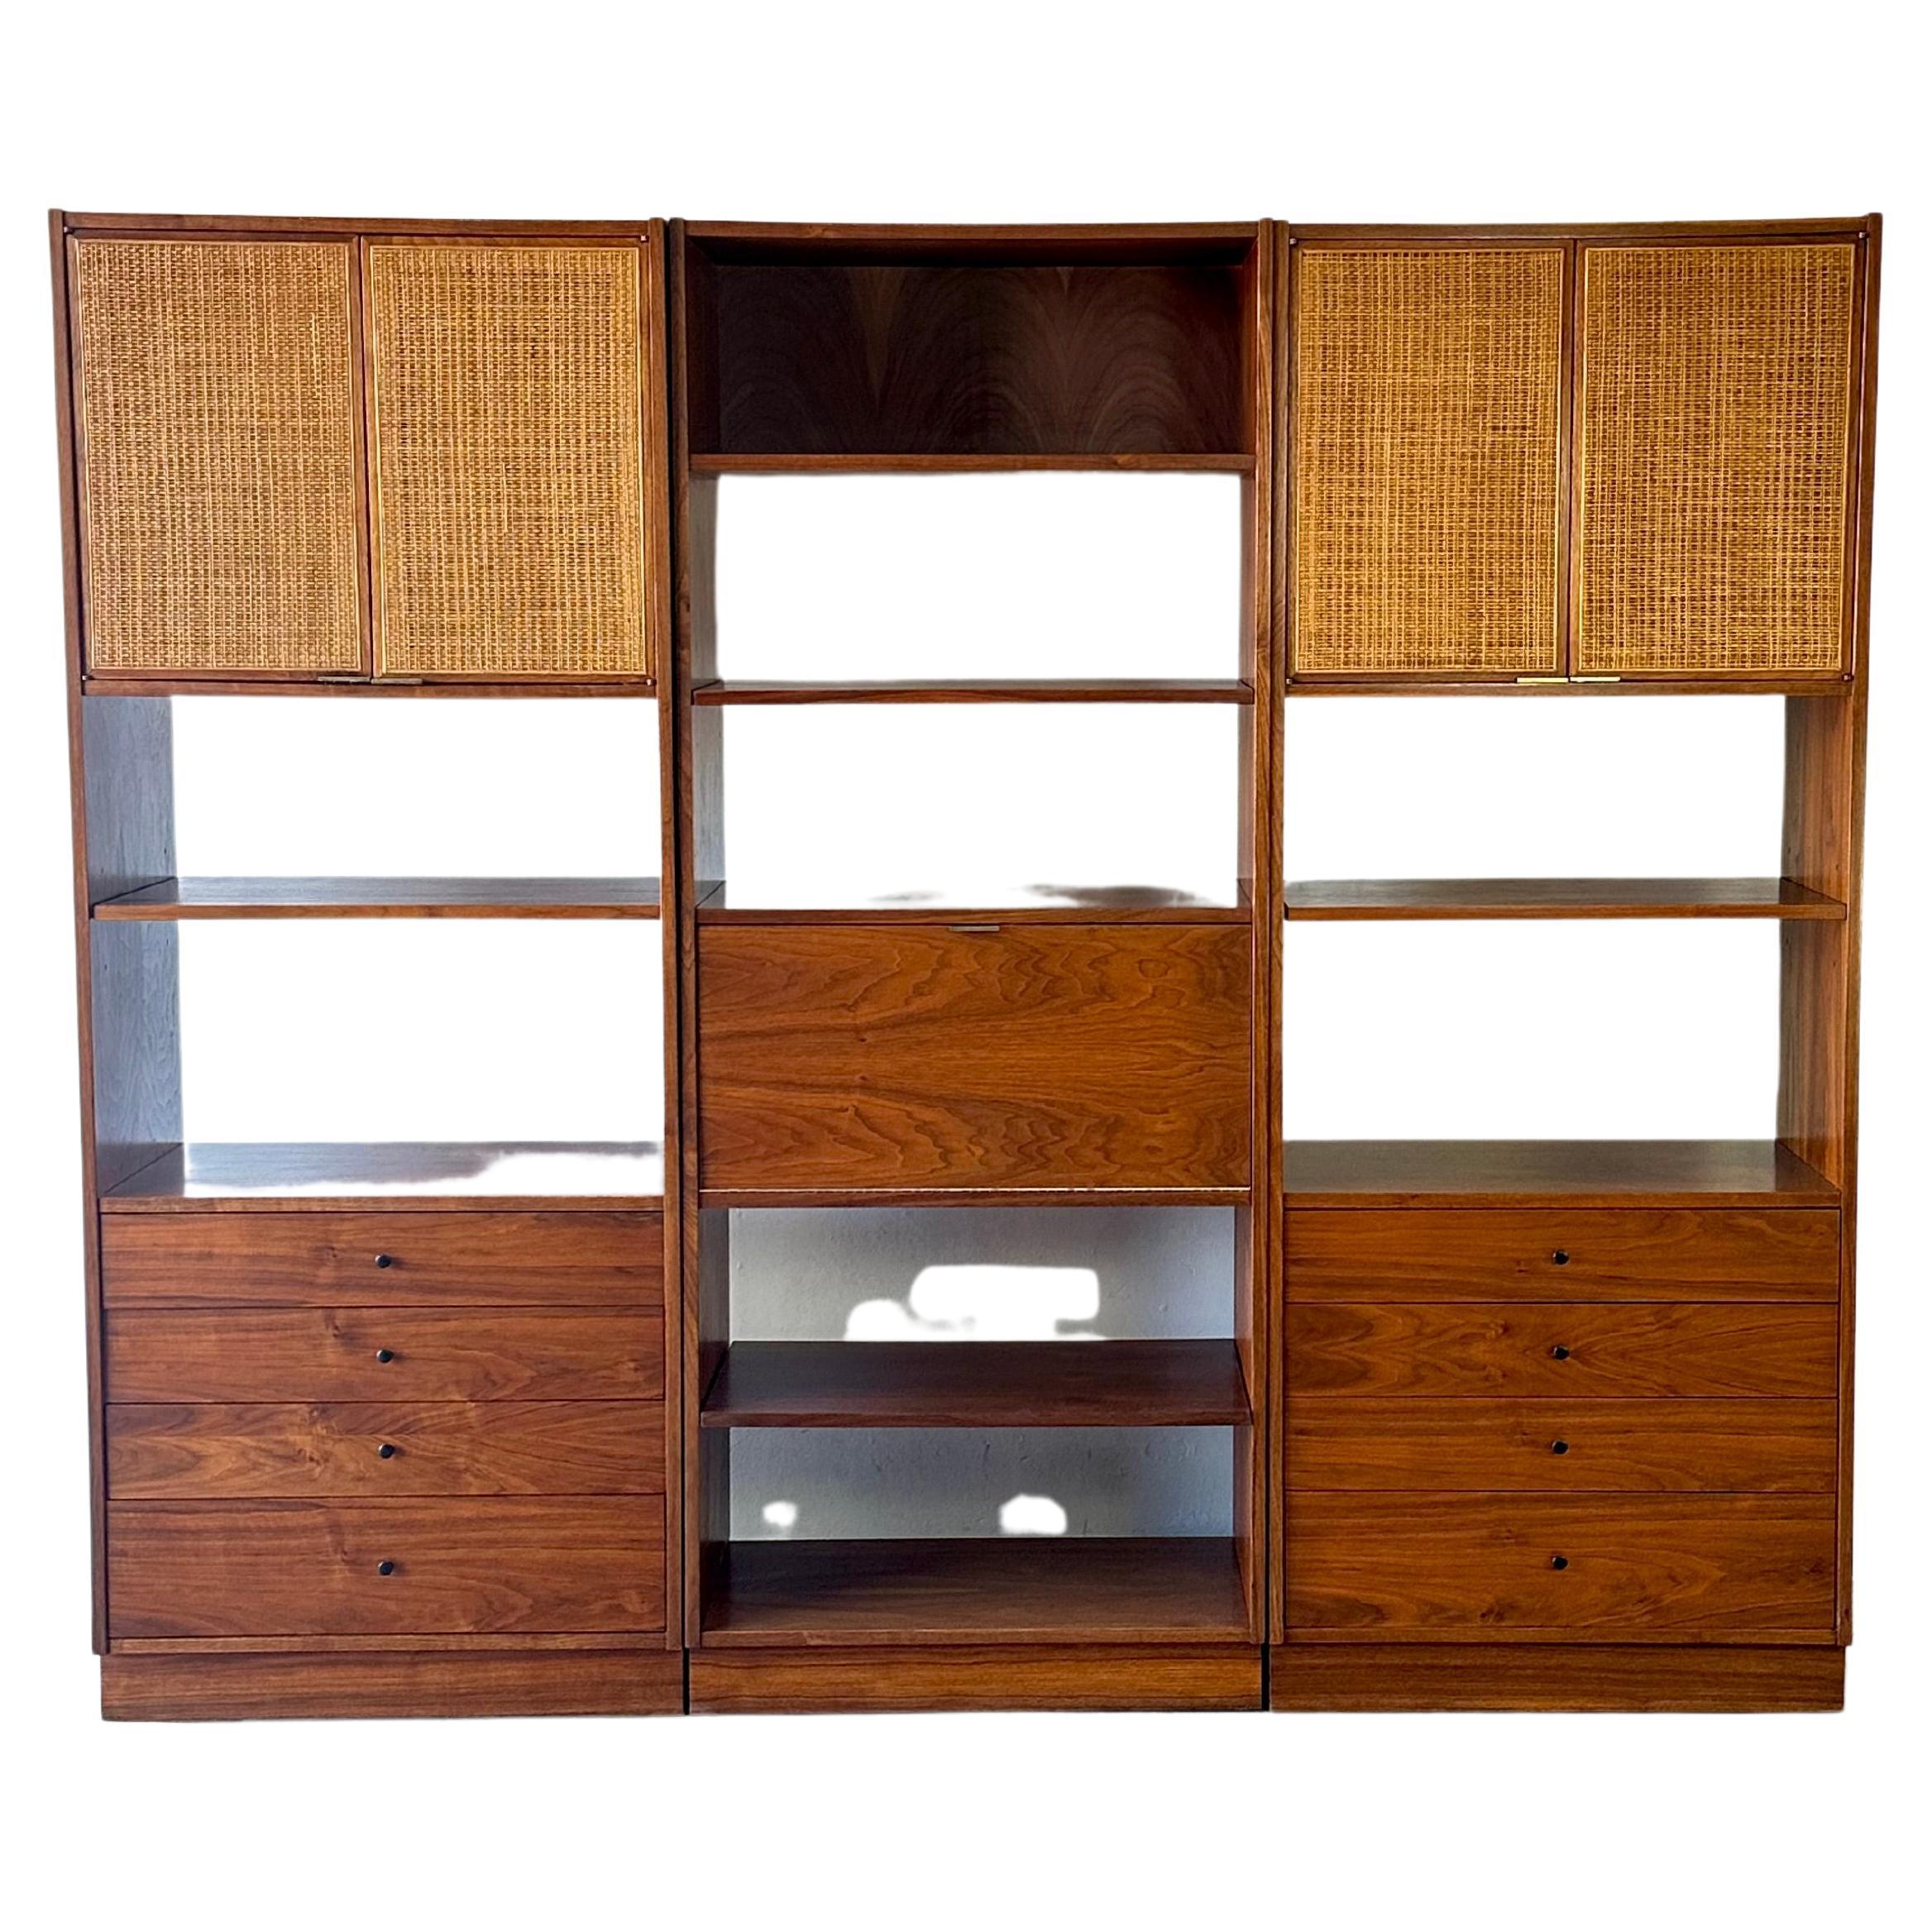 Midcentury Jack Cartwright for Founders, Room Divider Wall Unit